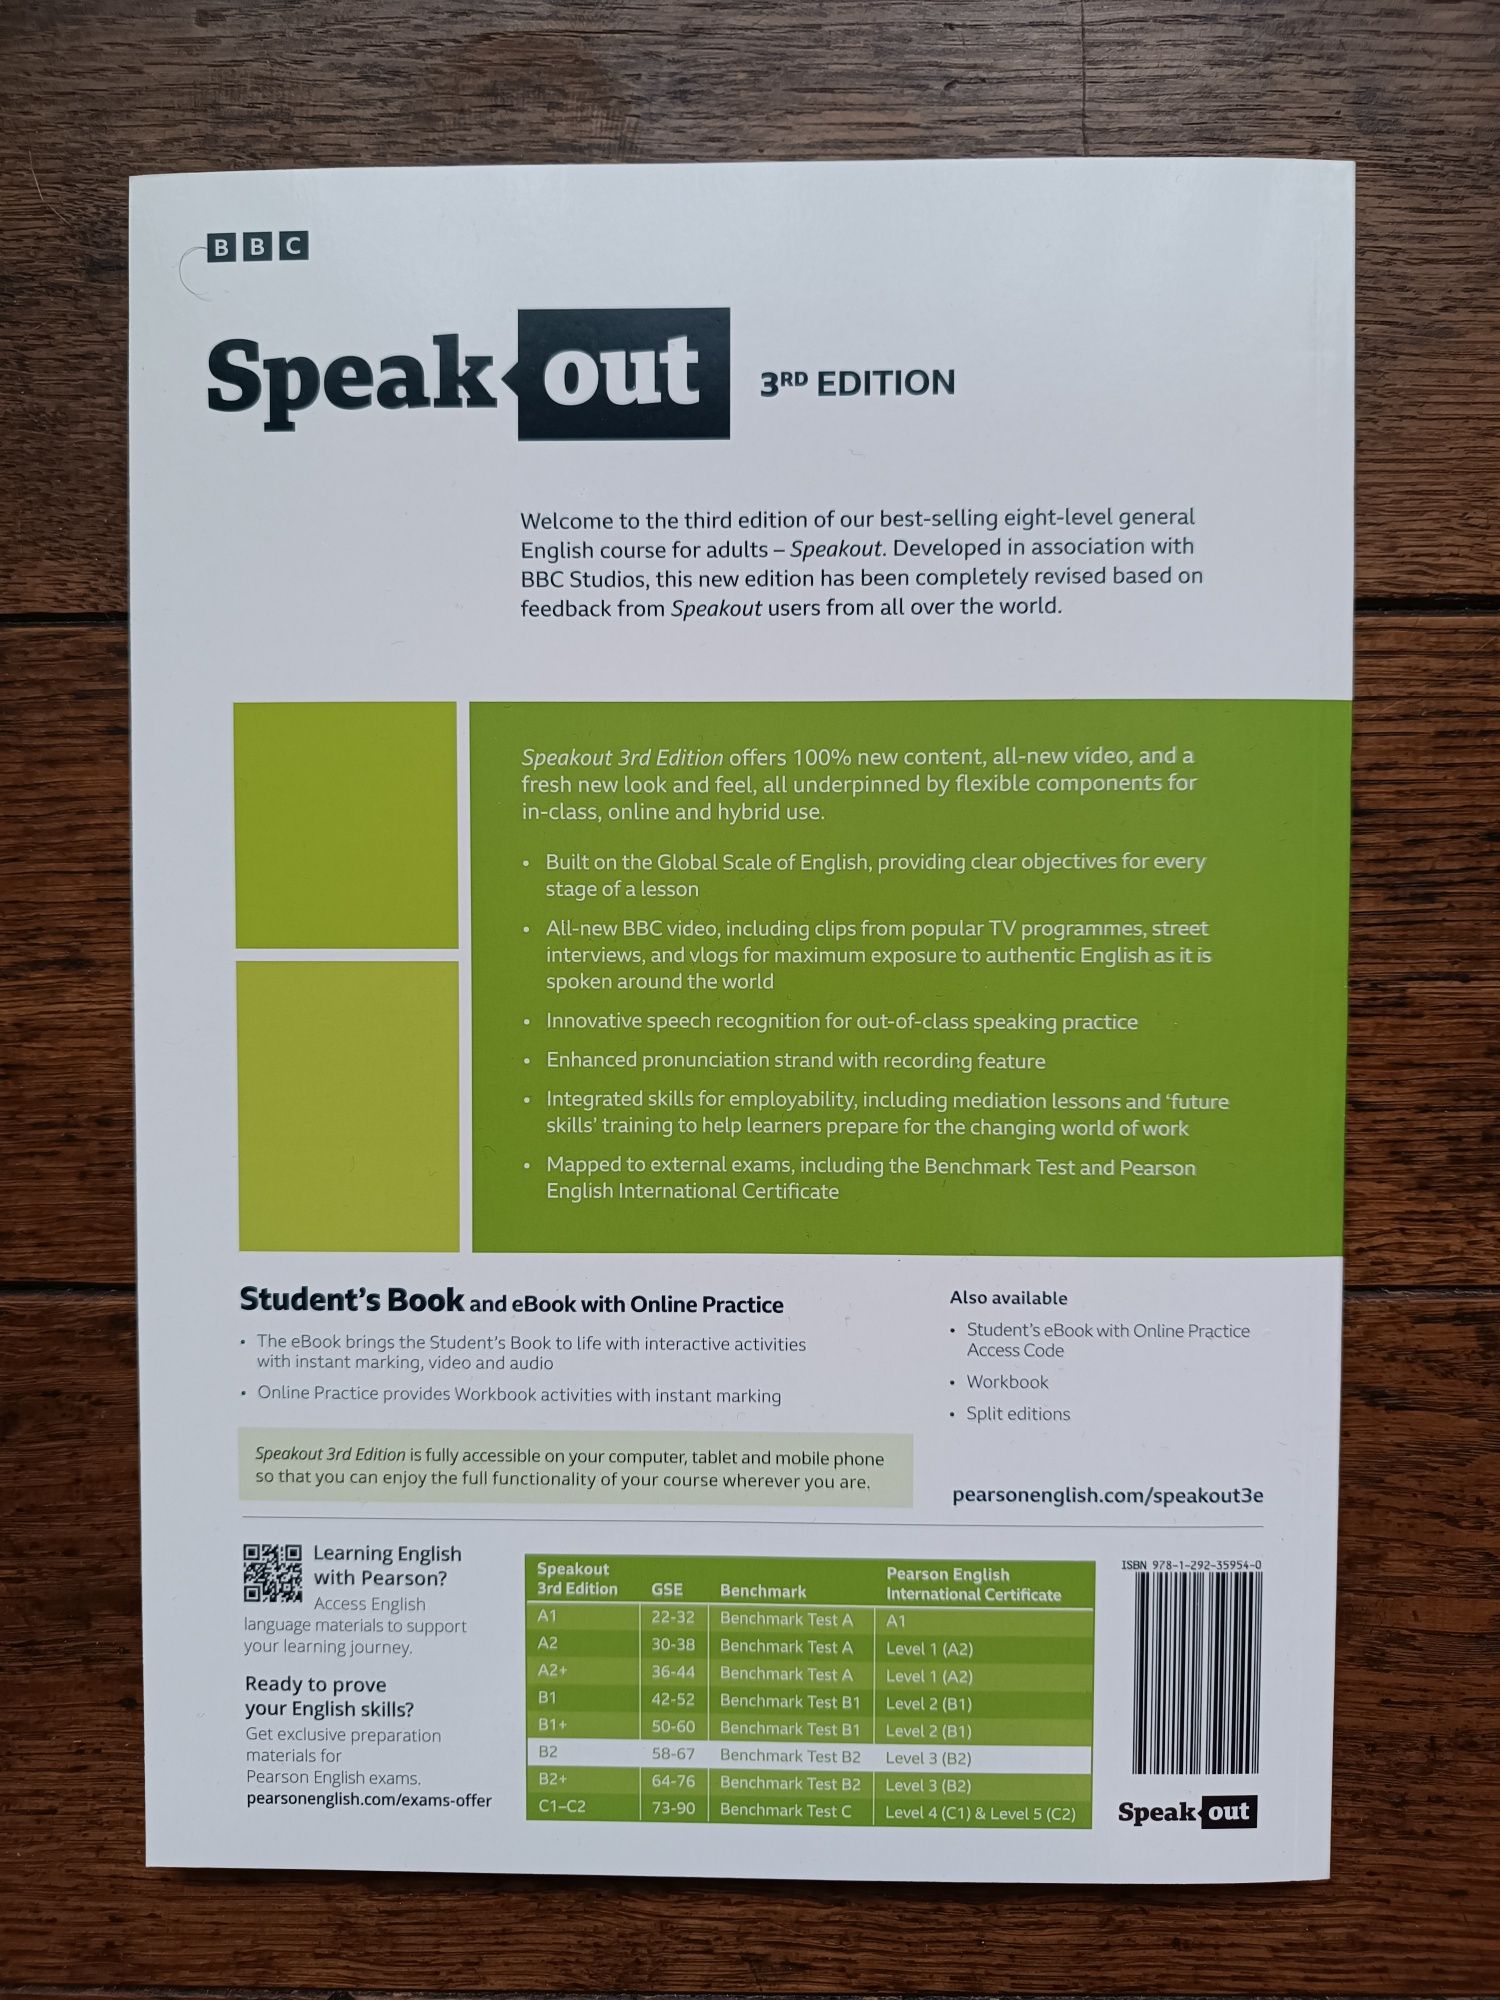 Speak out 3rd edition